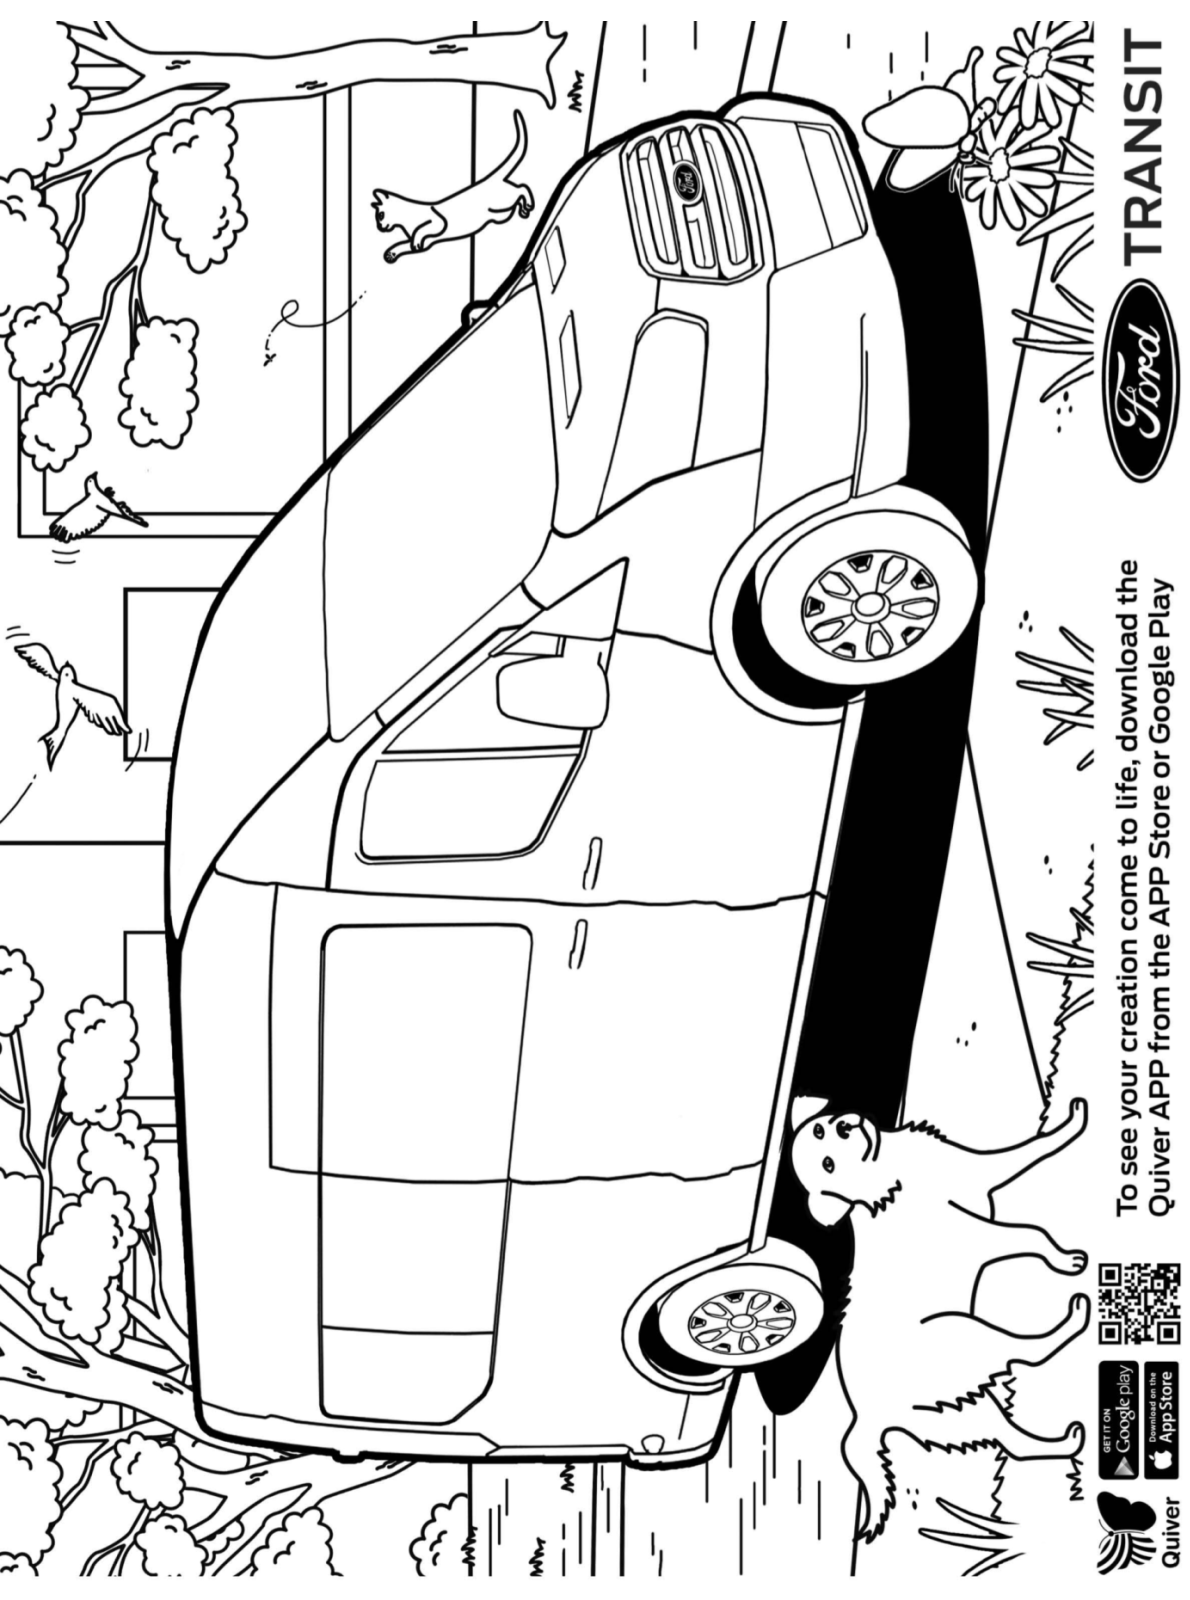 Kids-n-fun.com | Coloring page Quiver Ford Transit